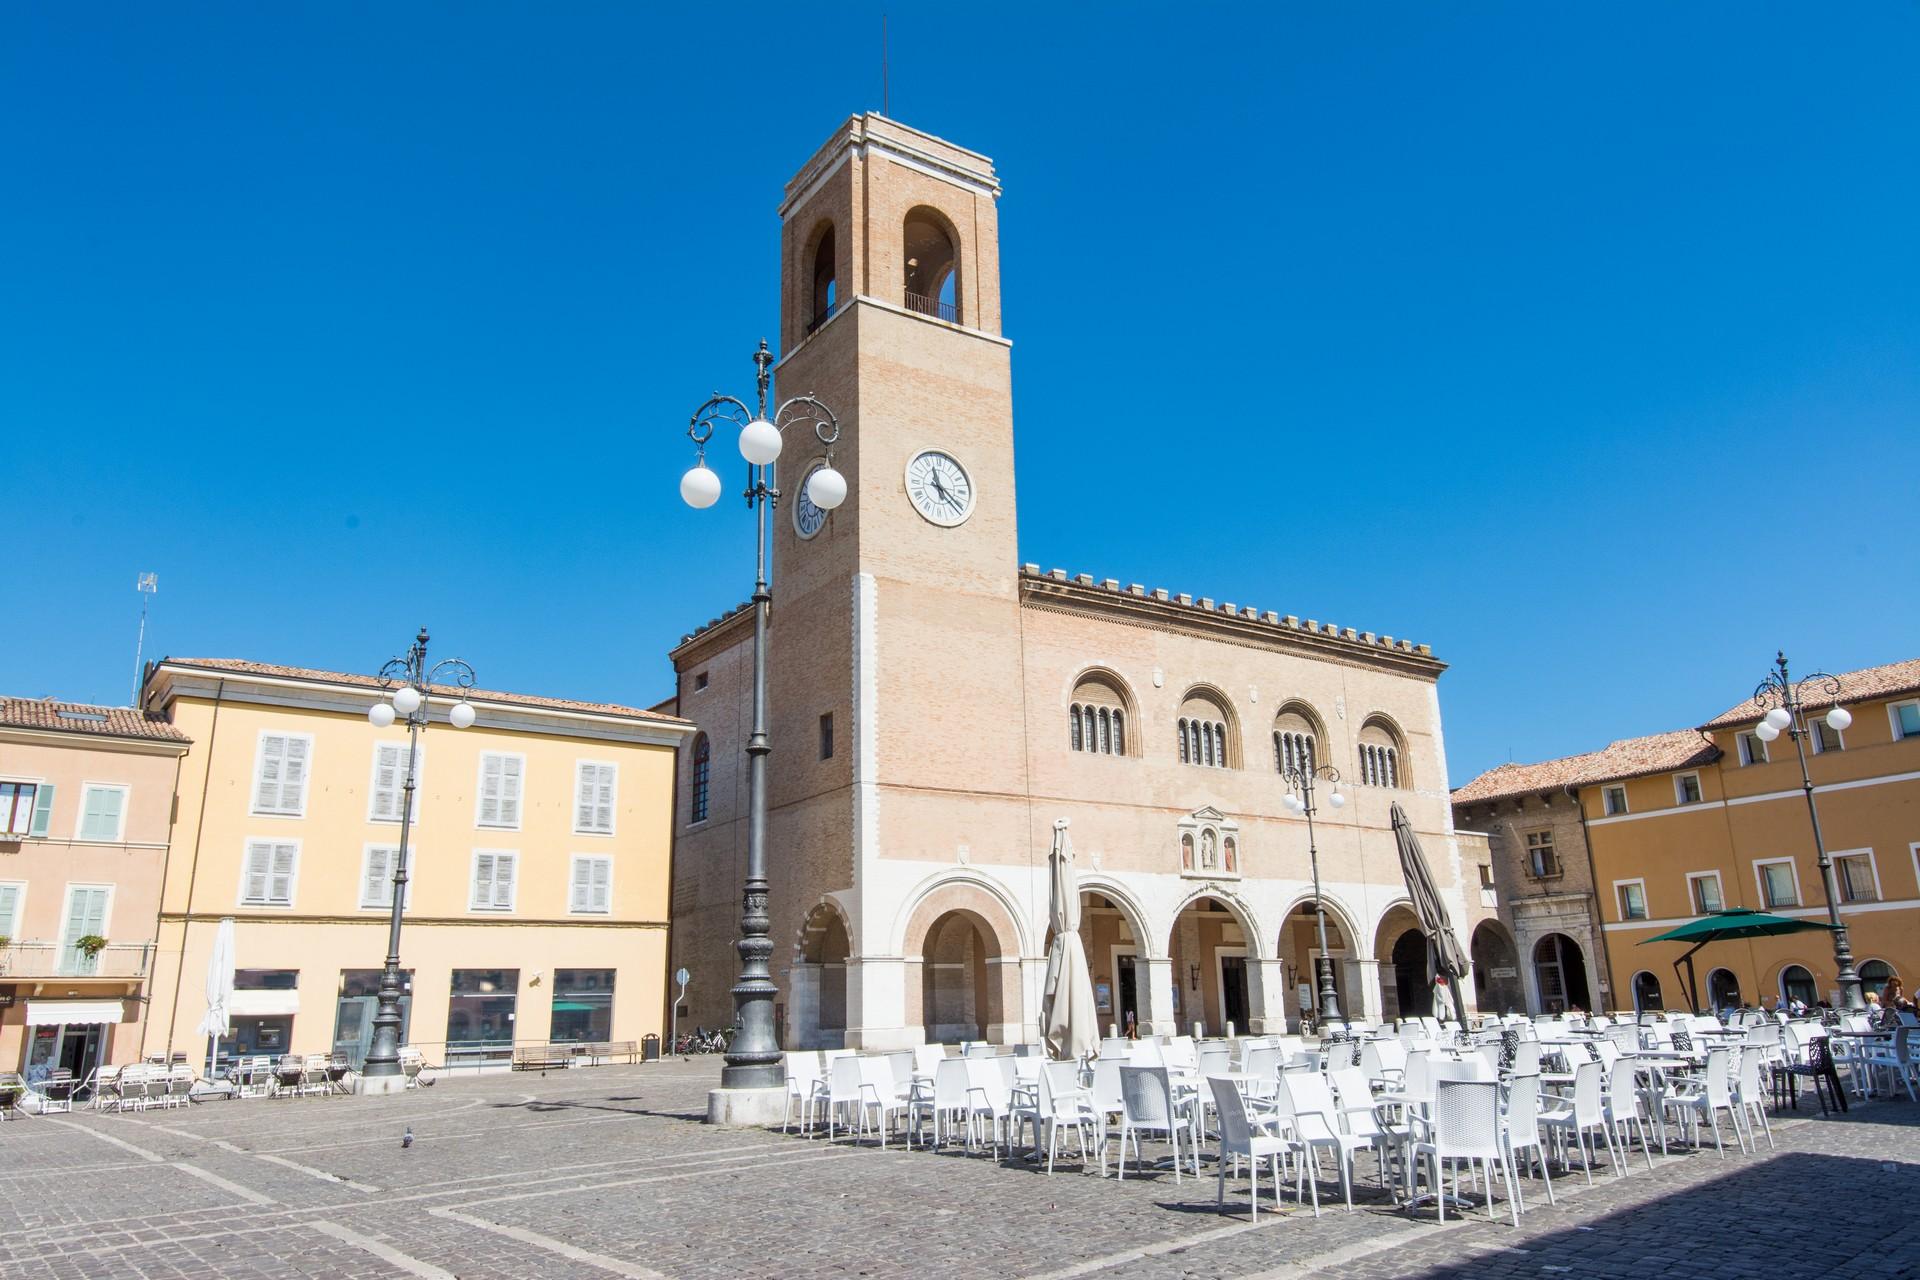 Architecture in Fano on a clear sky day